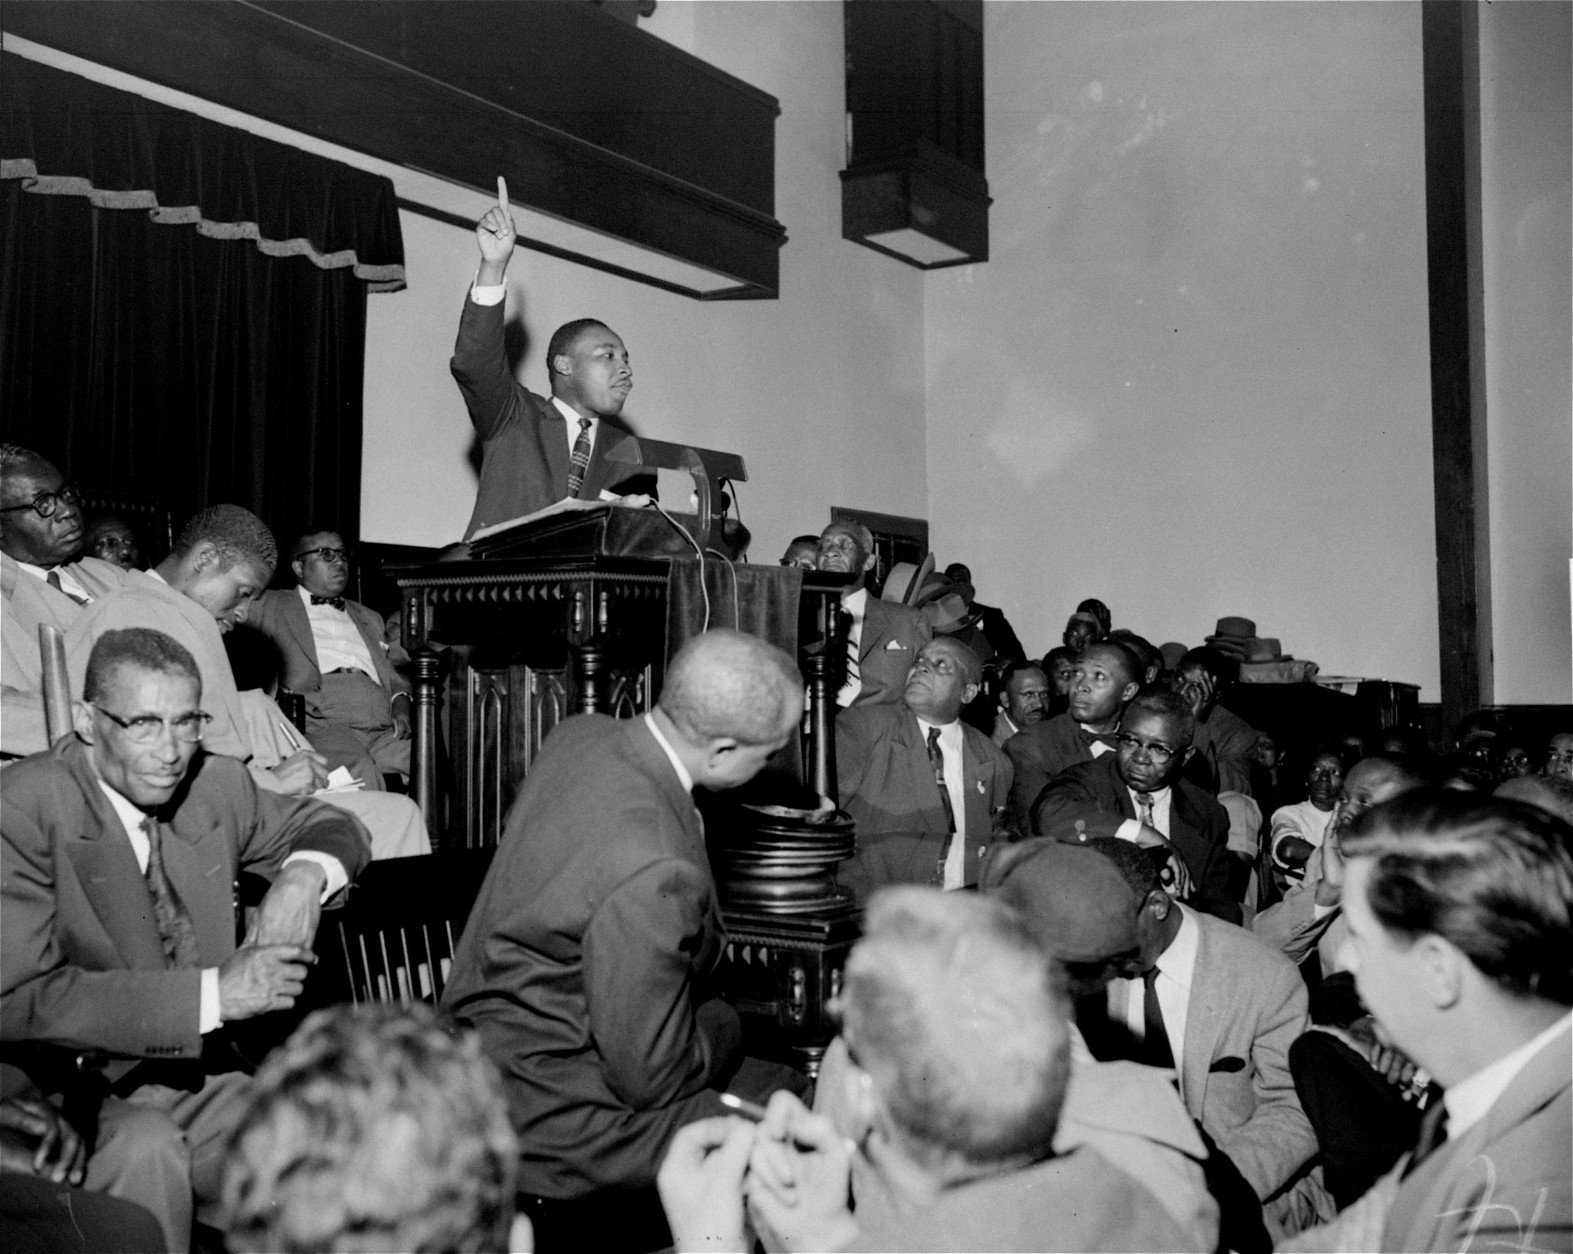 The Rev. Martin Luther King, Jr. is shown speaking to an overflow crowd at a mass meeting at the Holt Street Baptist Church.  King, leader of the mass bus boycott, was found guilty March 22, 1956 of conspiracy in the Montgomery bus boycott. He was fined $500.  King said the boycott of city buses will continue "no matter how many times they convict me."   (AP Photo/Gene Herrick)